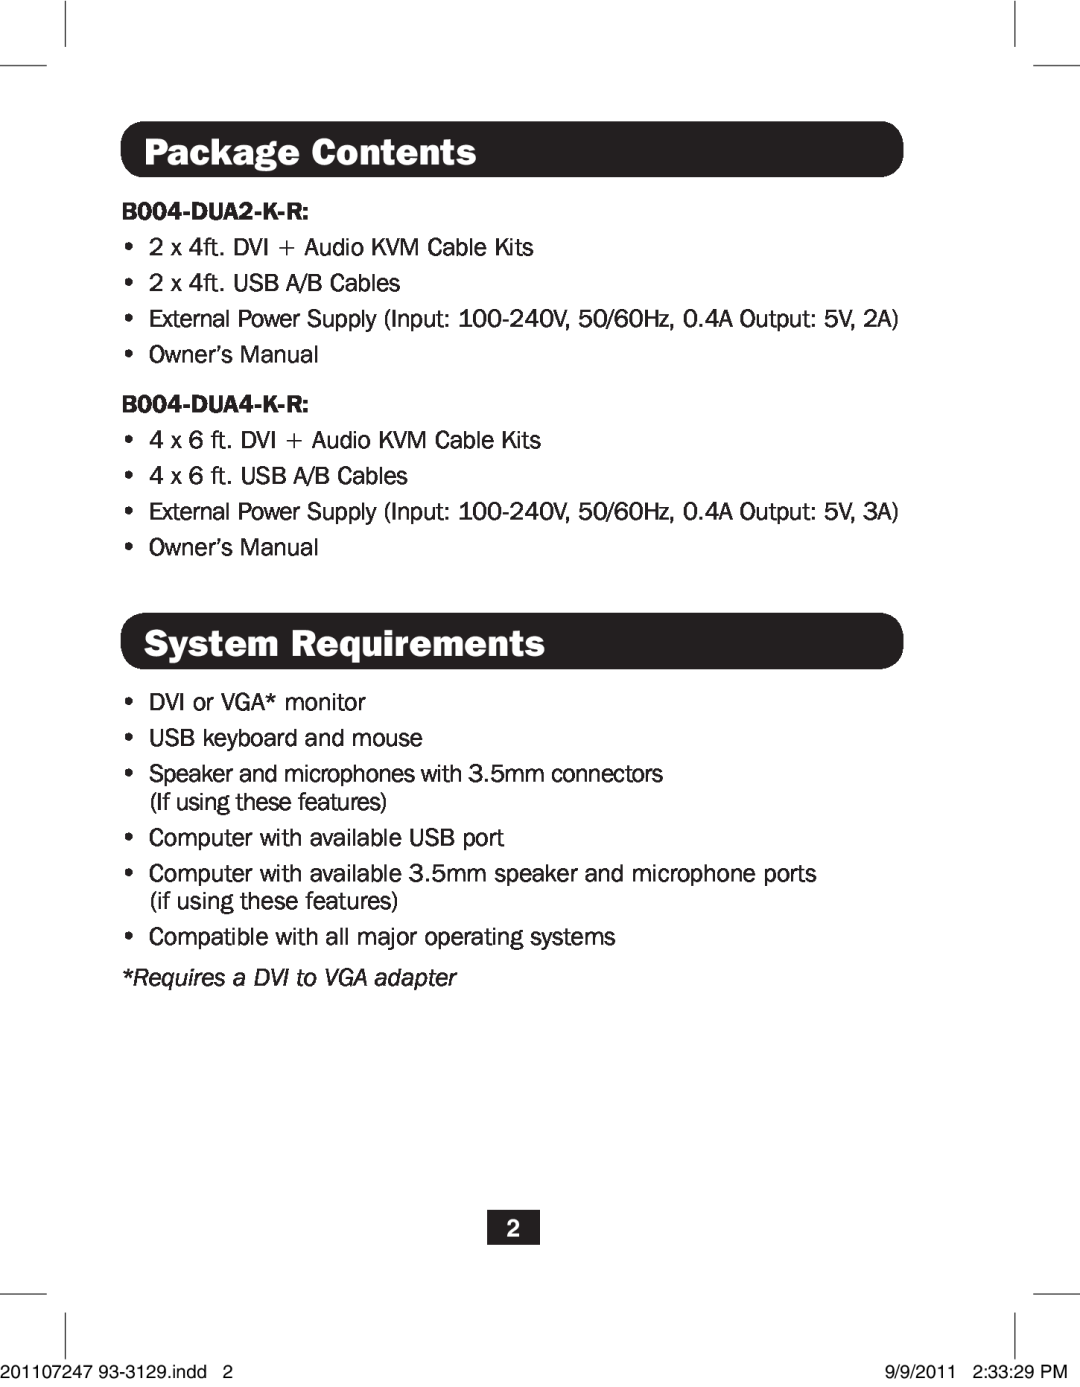 Tripp Lite B004-DUA4-K-R owner manual Package Contents, System Requirements 